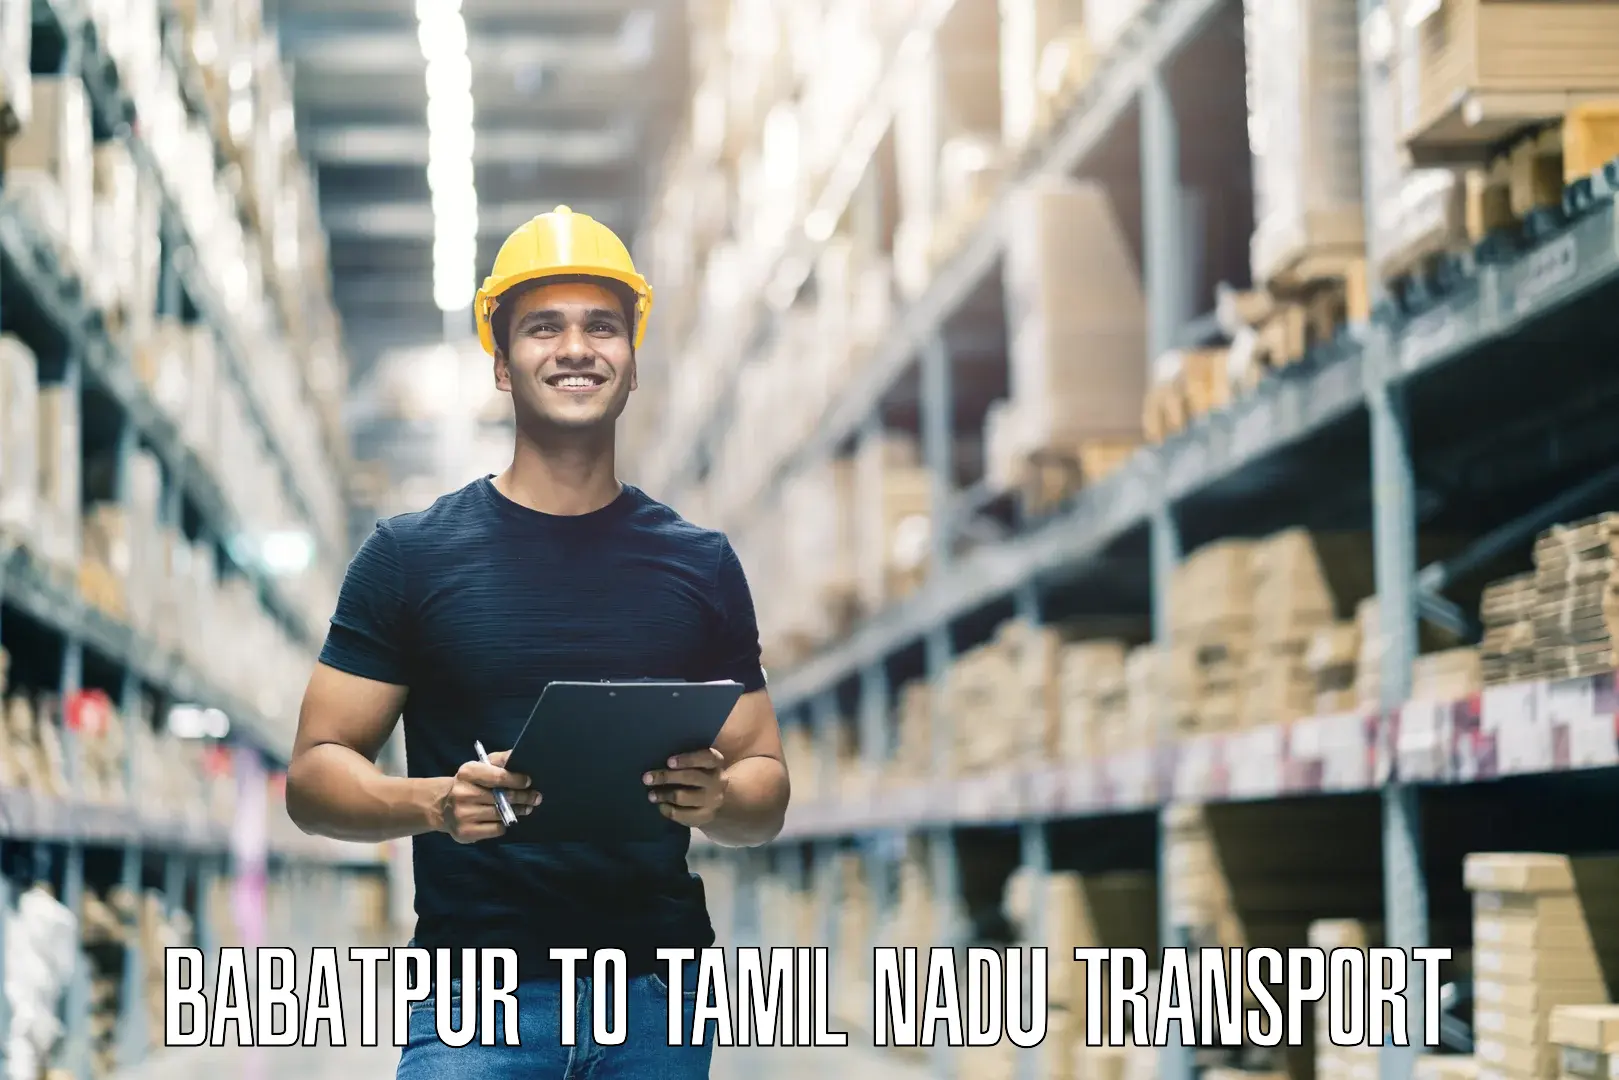 Goods delivery service Babatpur to Coimbatore